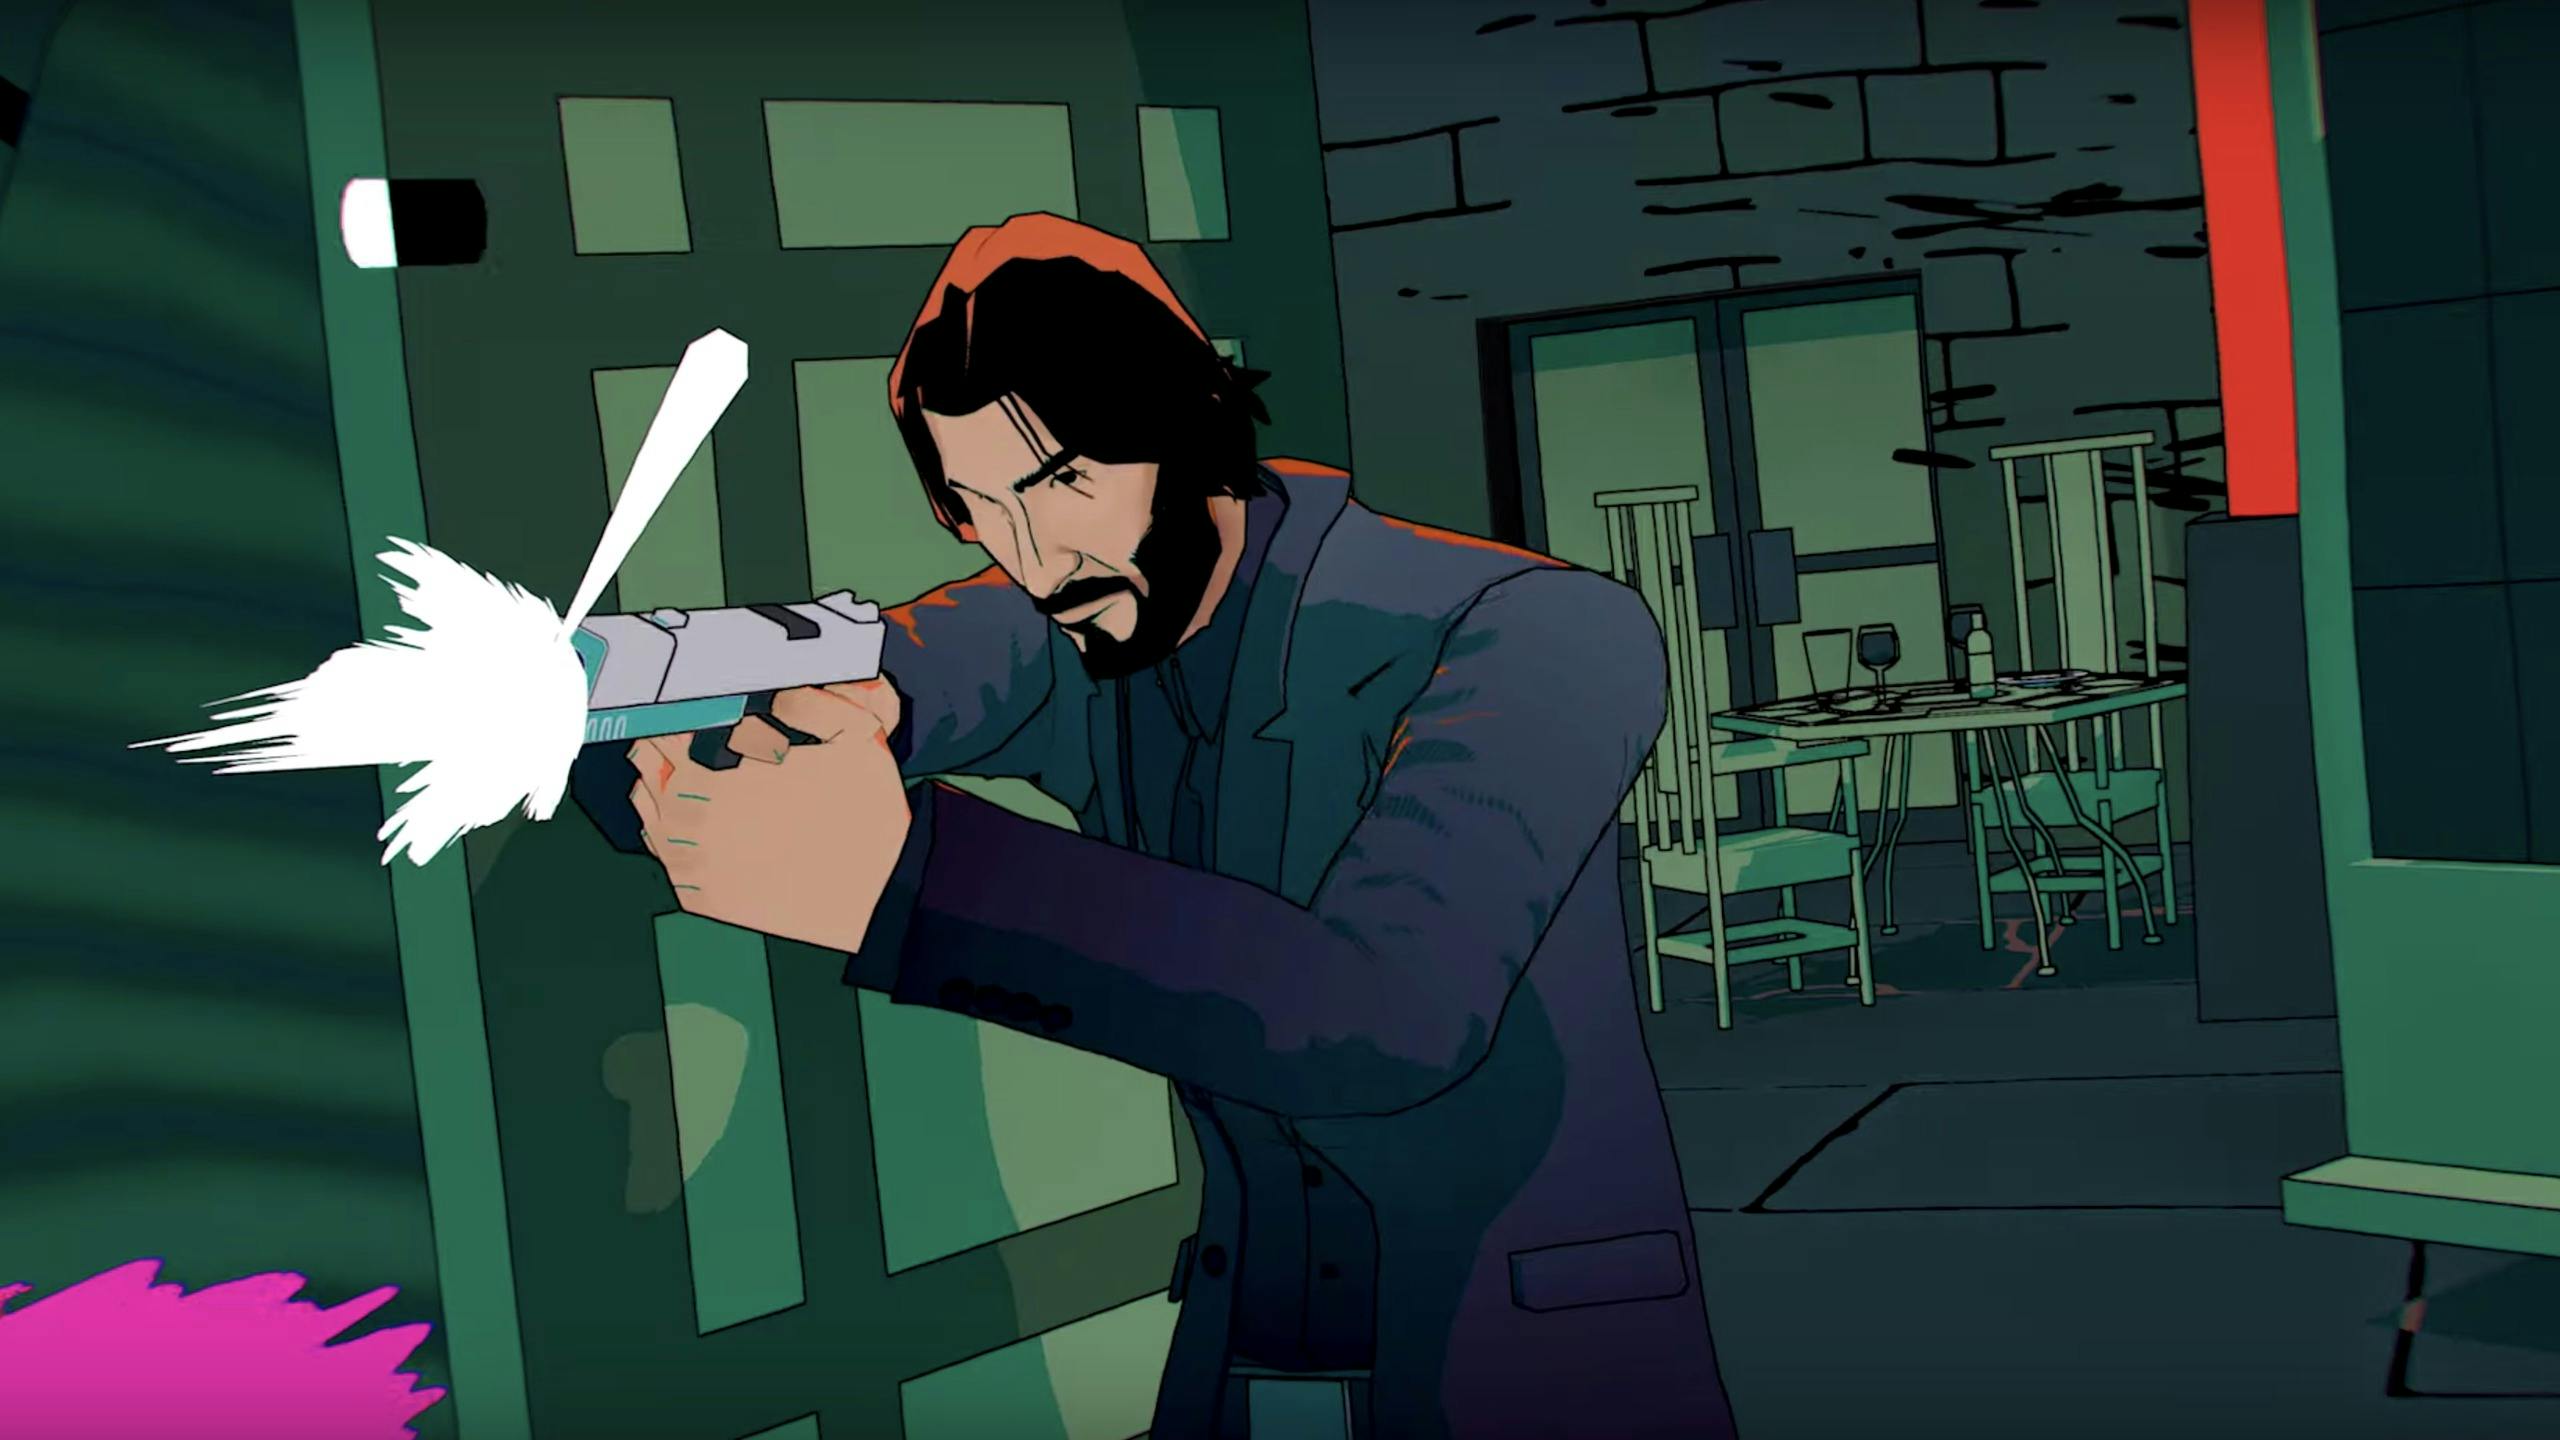 John Wick» 1080P, 2k, 4k HD wallpapers, backgrounds free download | Rare  Gallery